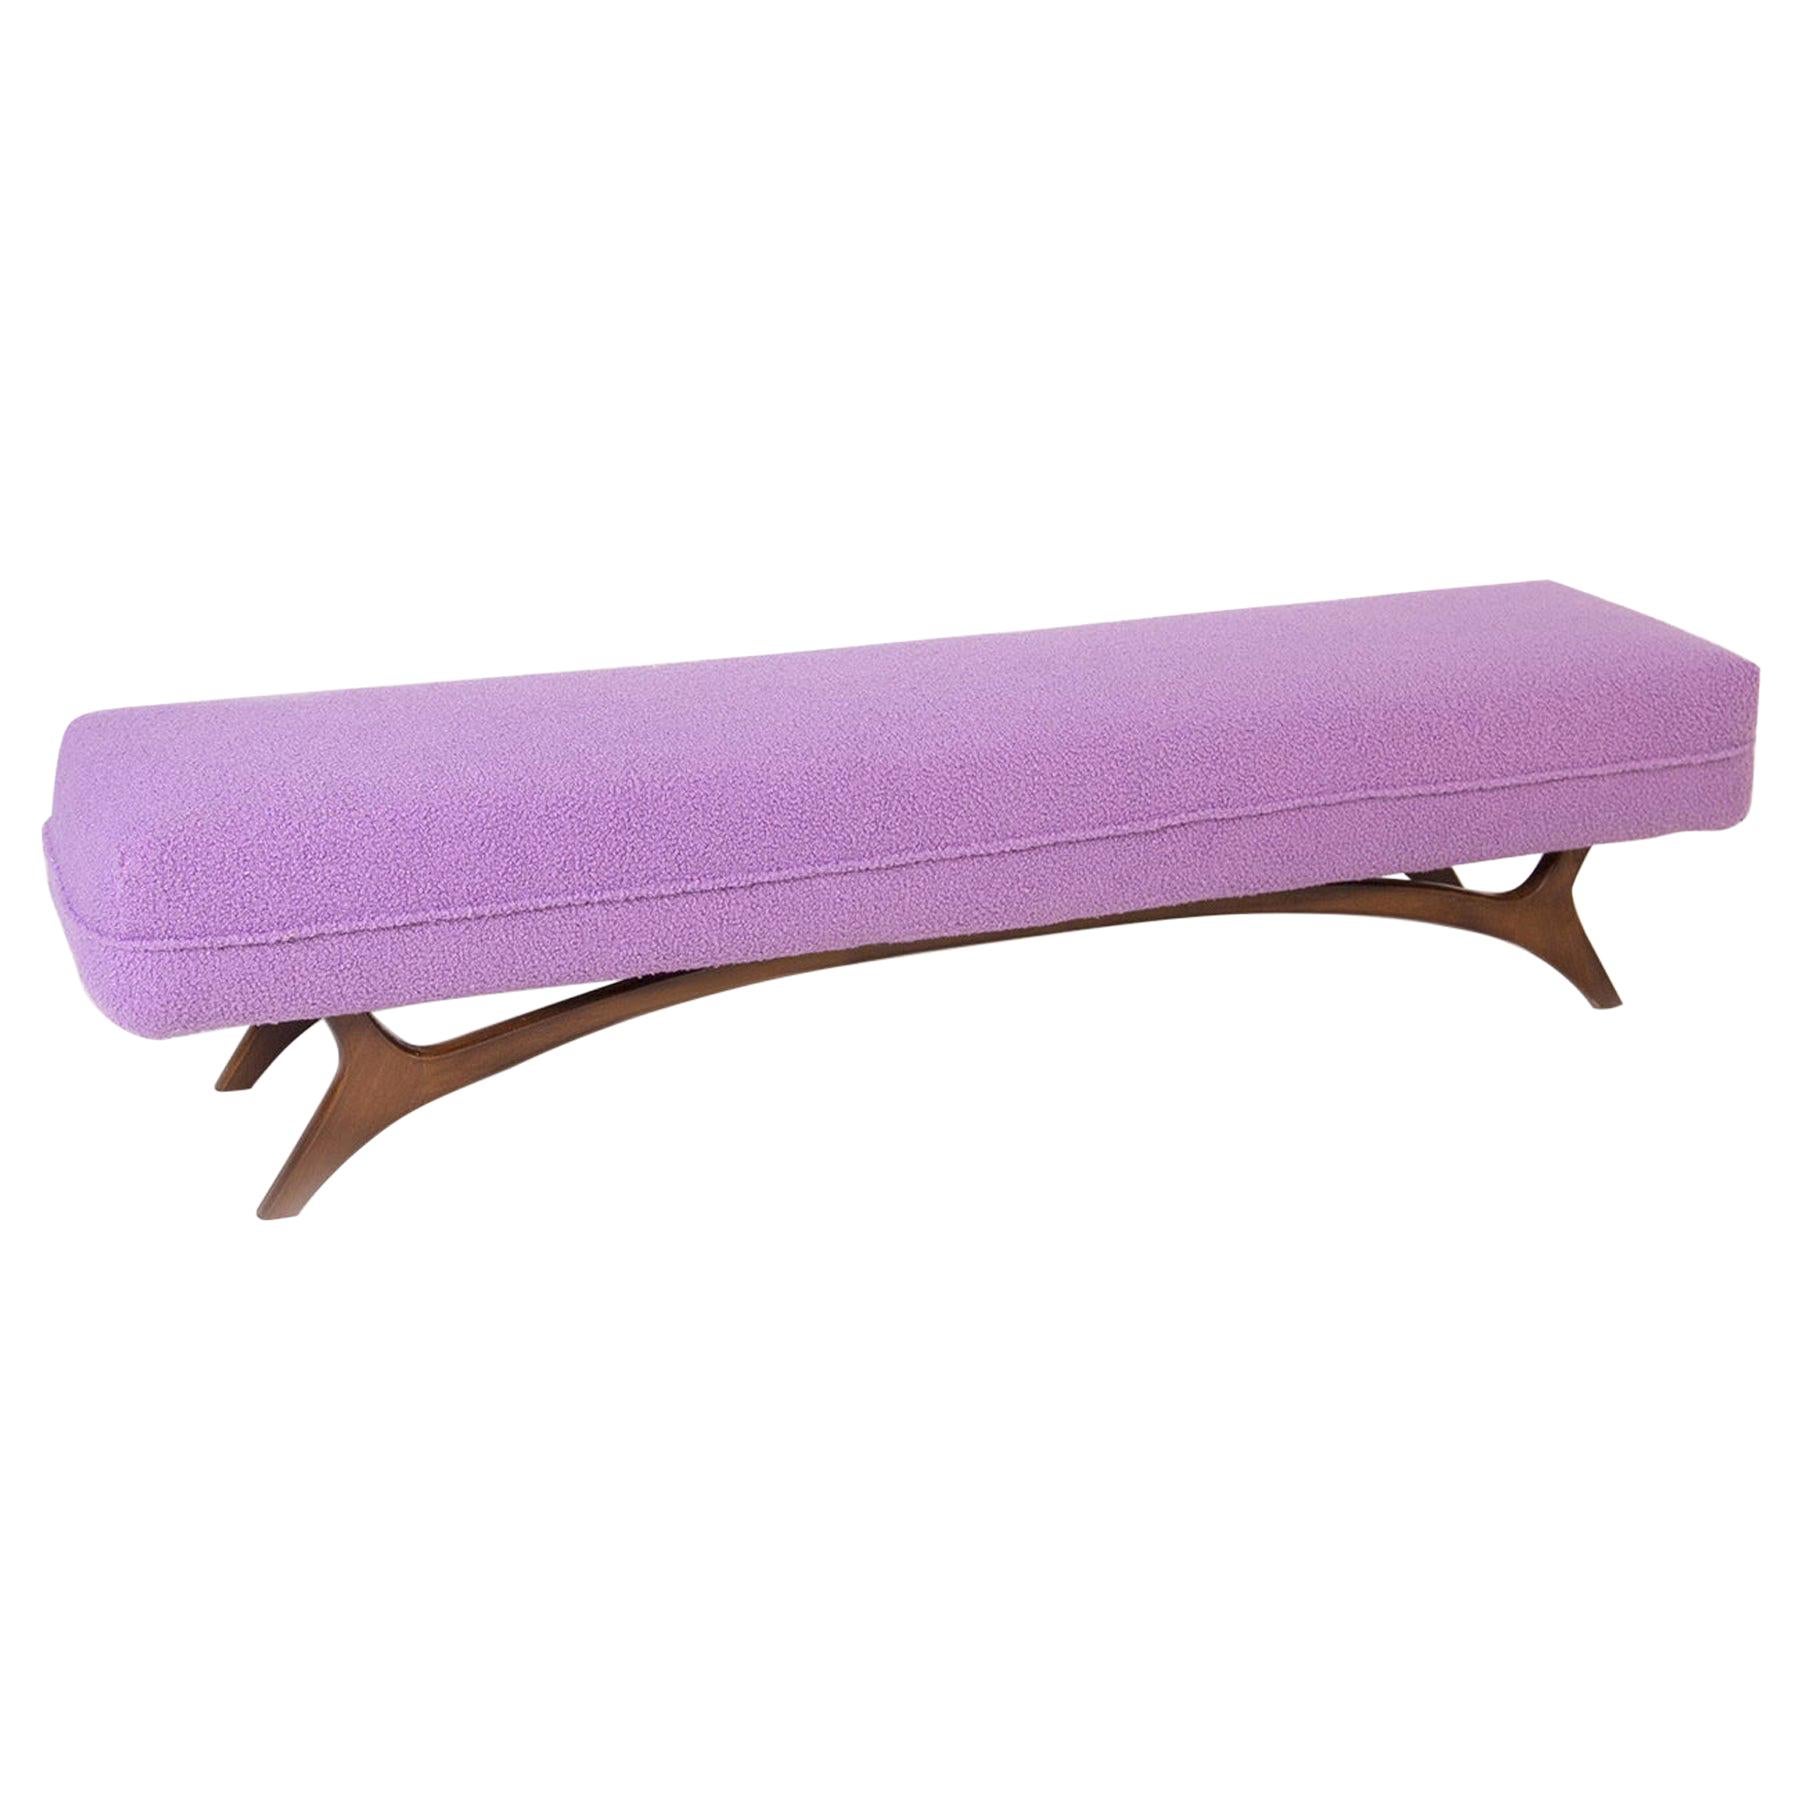 American Vintage Bench in Lilac Bouclé